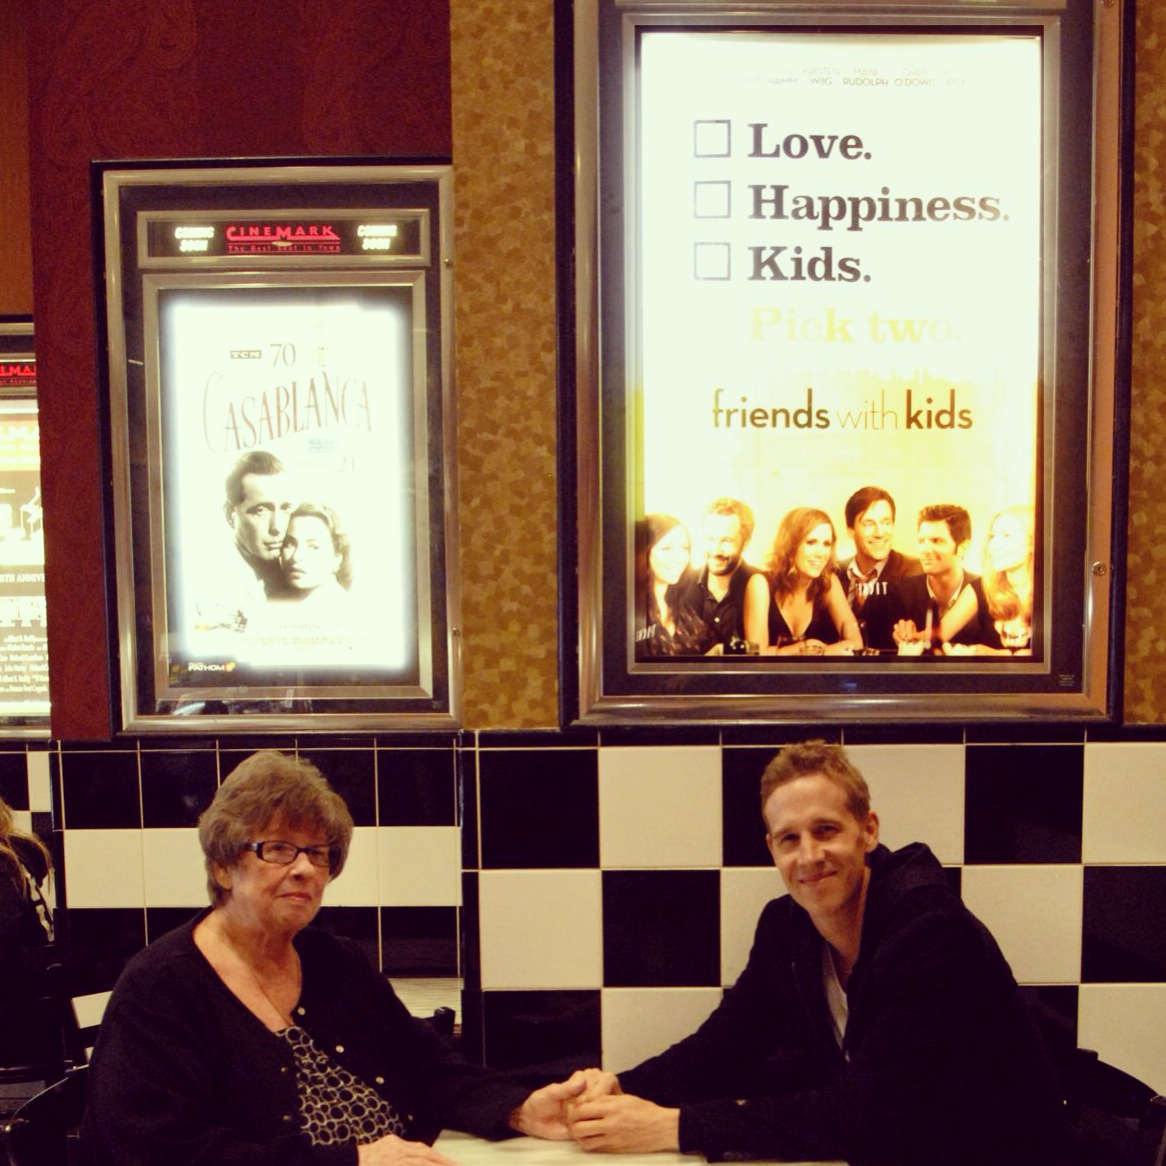 Friends with Kids producer, Joey McFarland, right, poses for a photo with his mother, JoAnne, left, on the opening night of the movie at Tinseltown theater in Louisville. March 09, 2012.